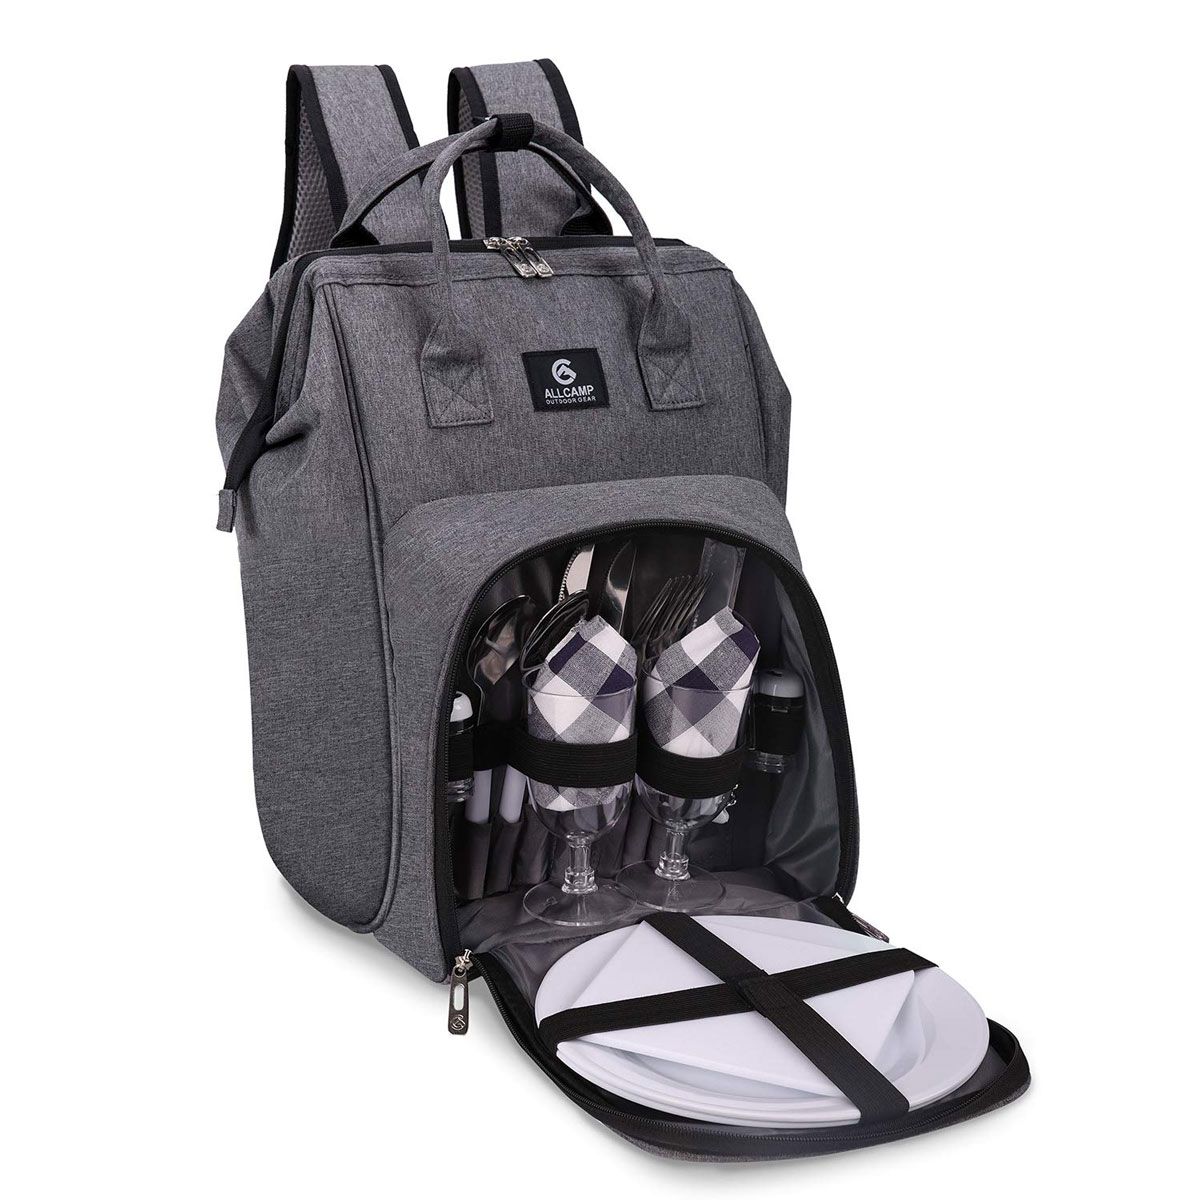 Picnic Backpacks The 6 Best Picnic Backpacks to Bring Everywhere This Season | Food & Wine